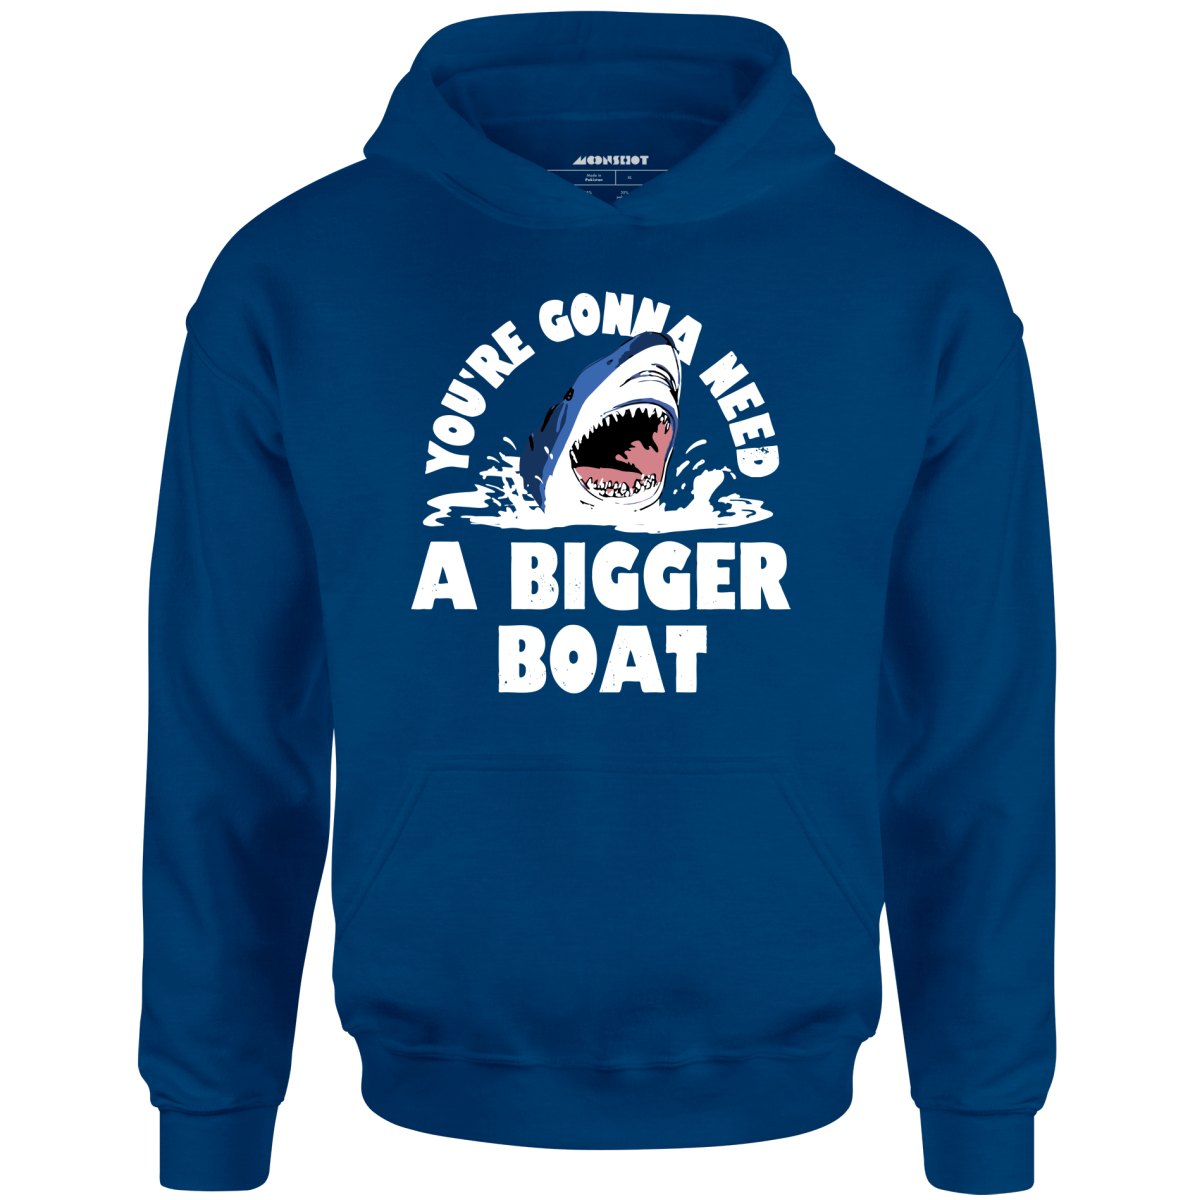 You're Gonna Need A Bigger boat - Unisex Hoodie